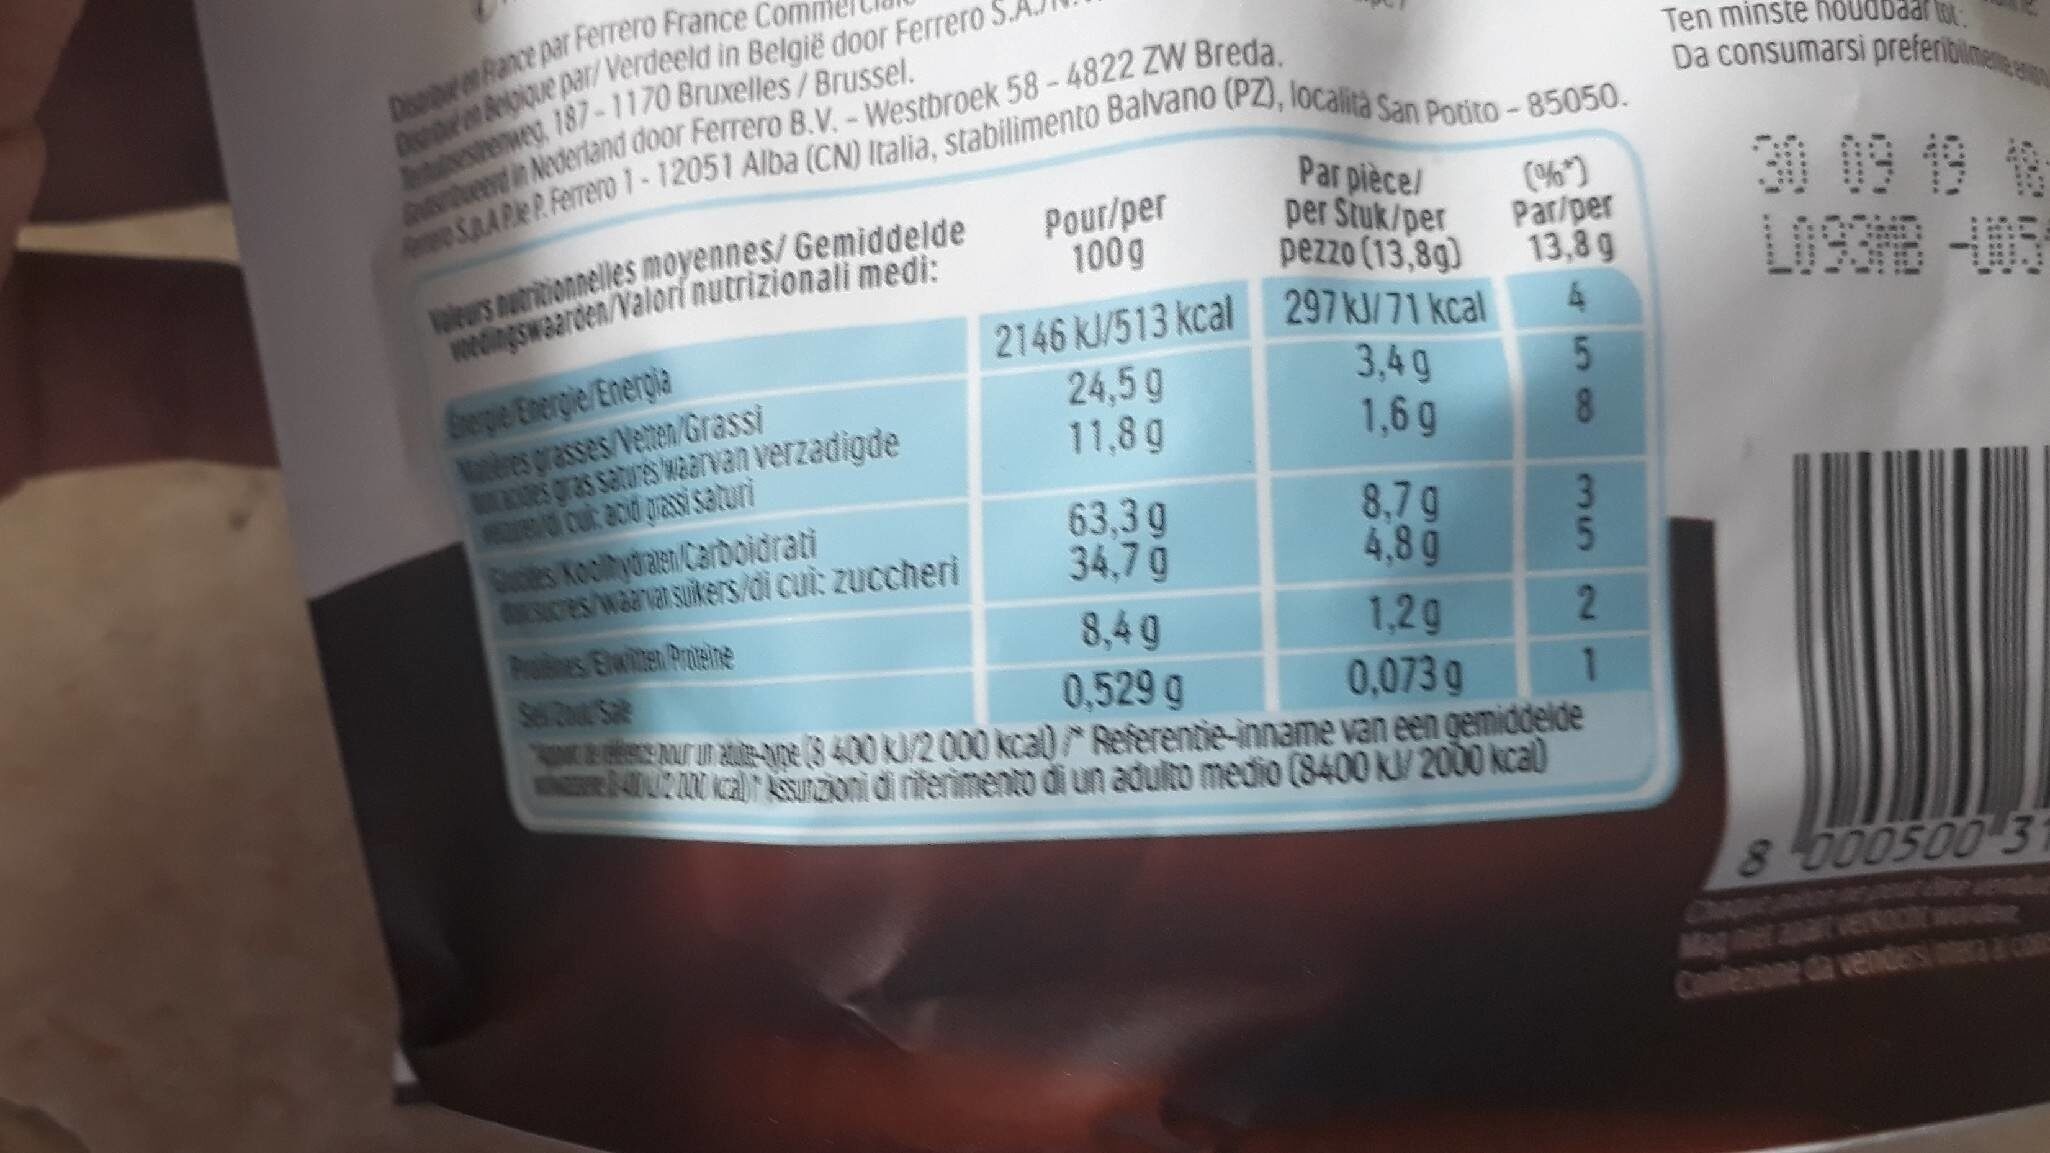 Nutella Ferrero biscuits - Nutrition facts - fr